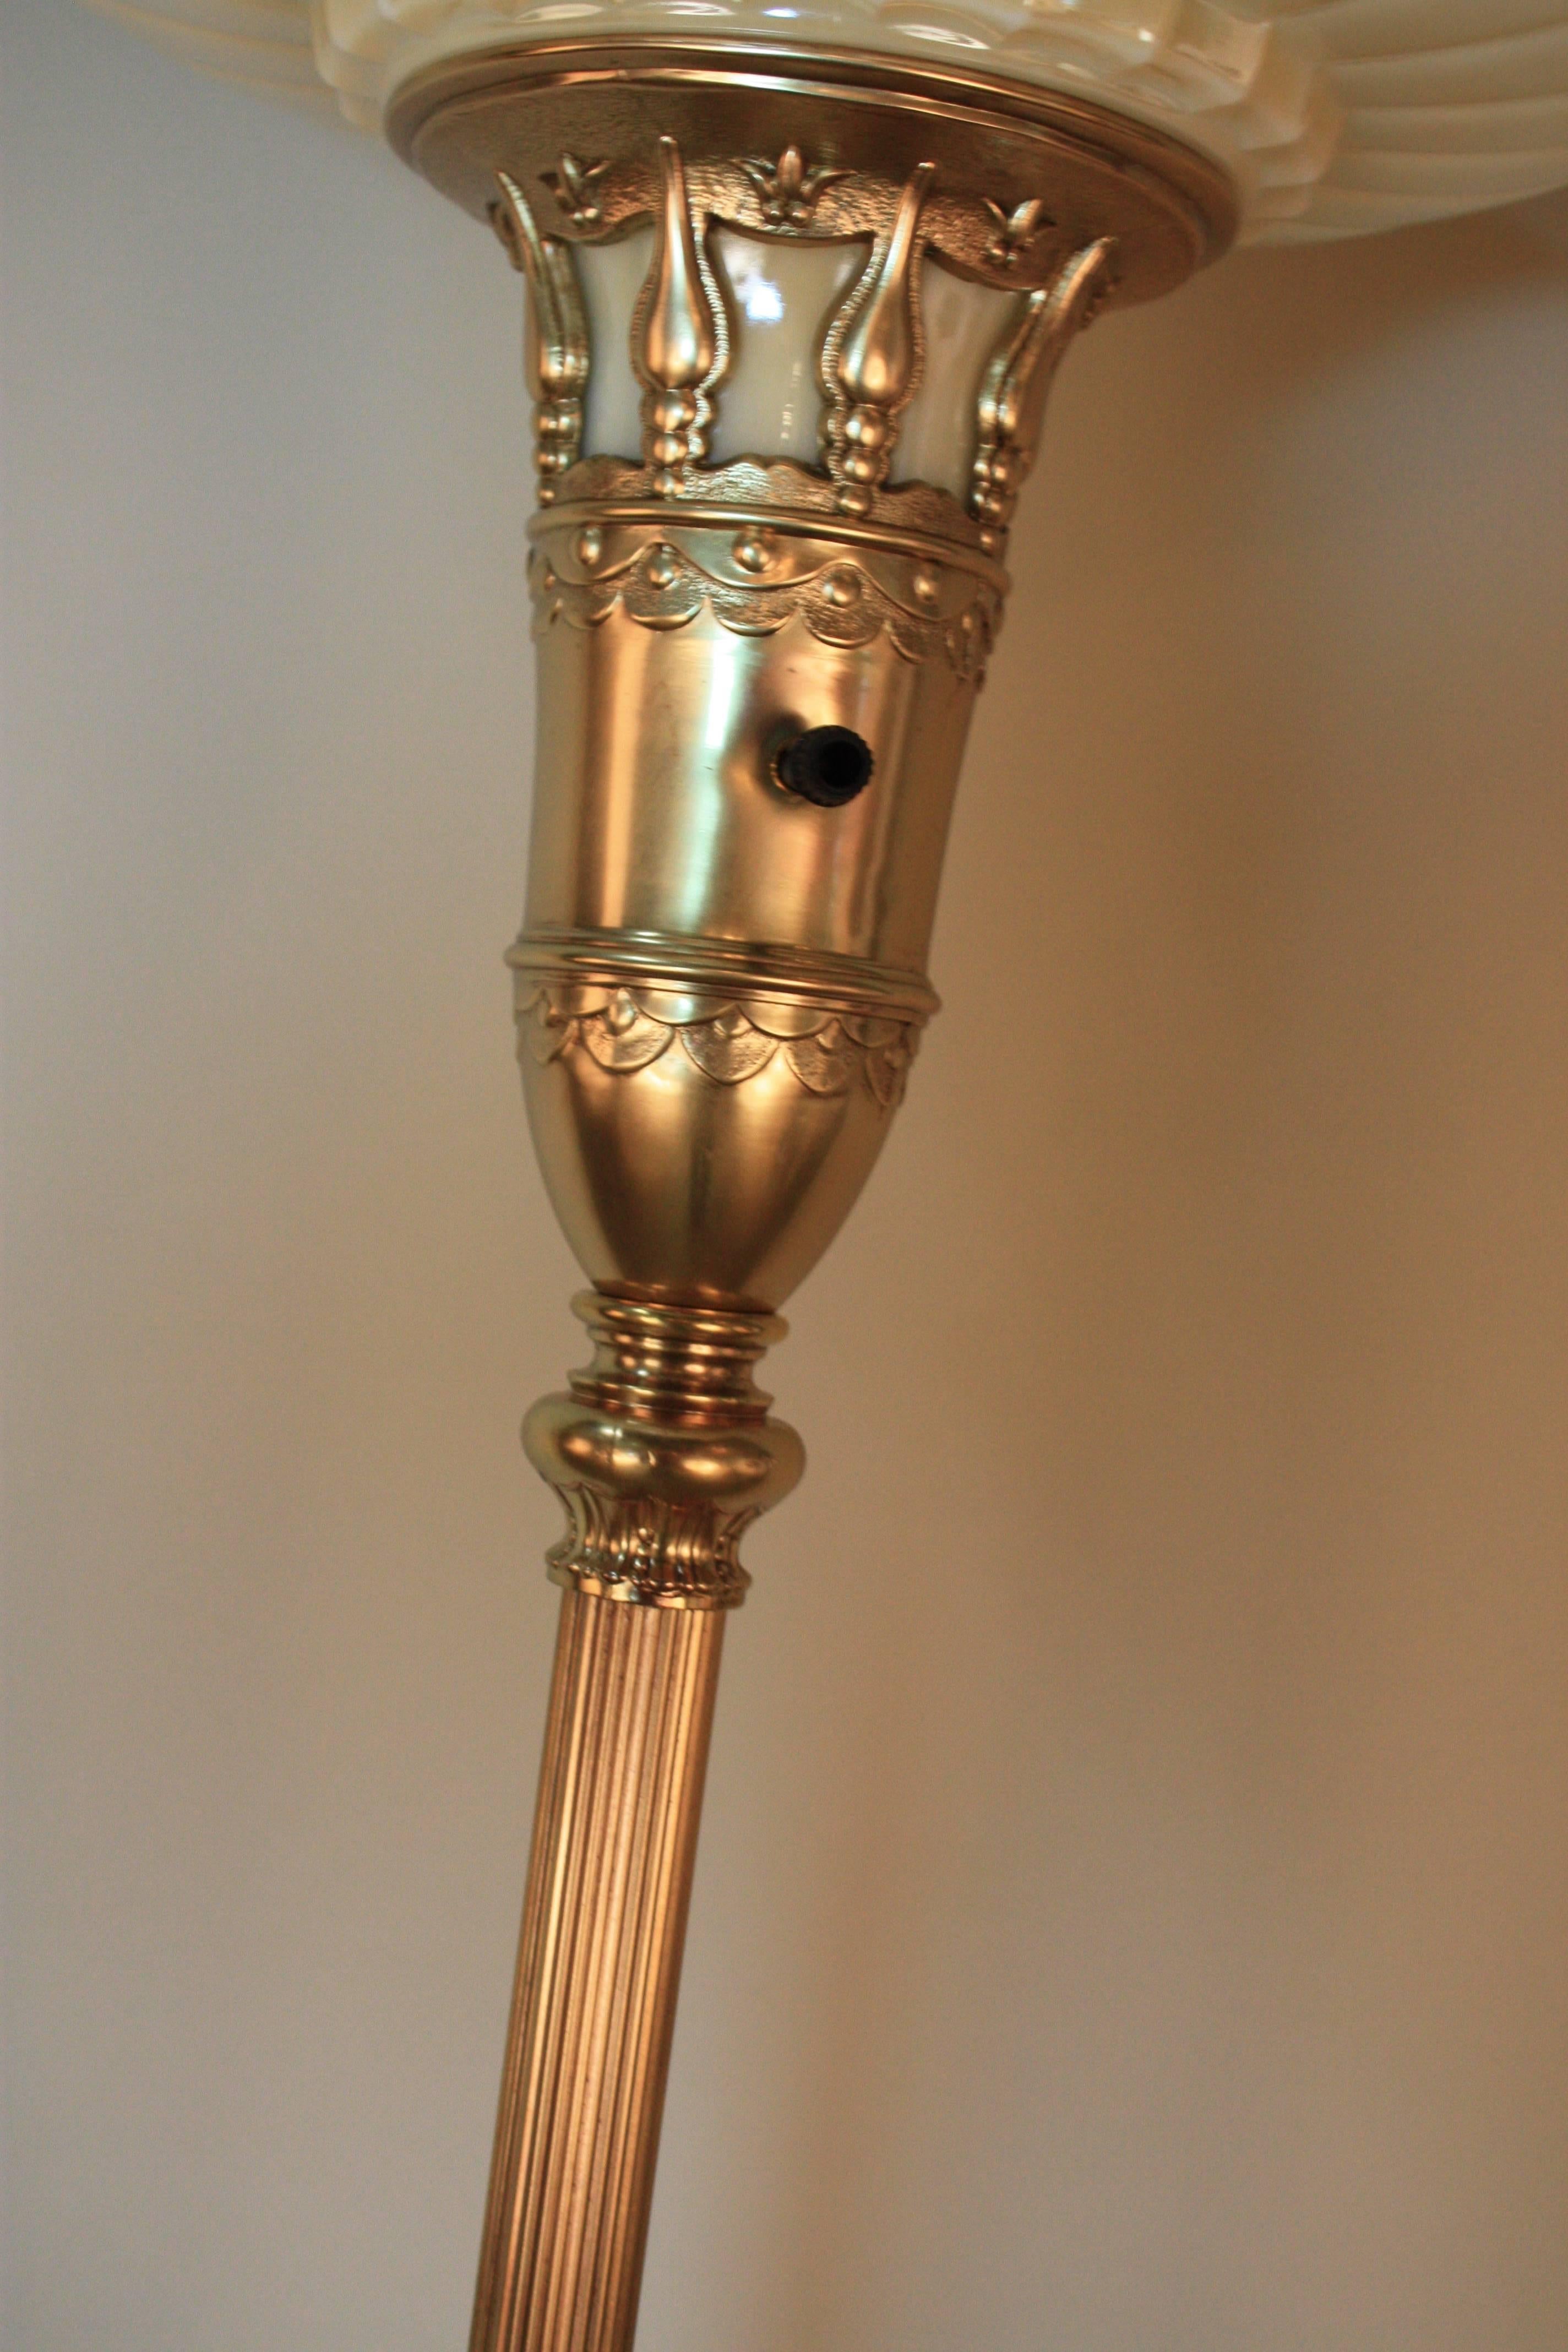 Mid-20th Century American Torchiere Floor Lamp with Onyx Base